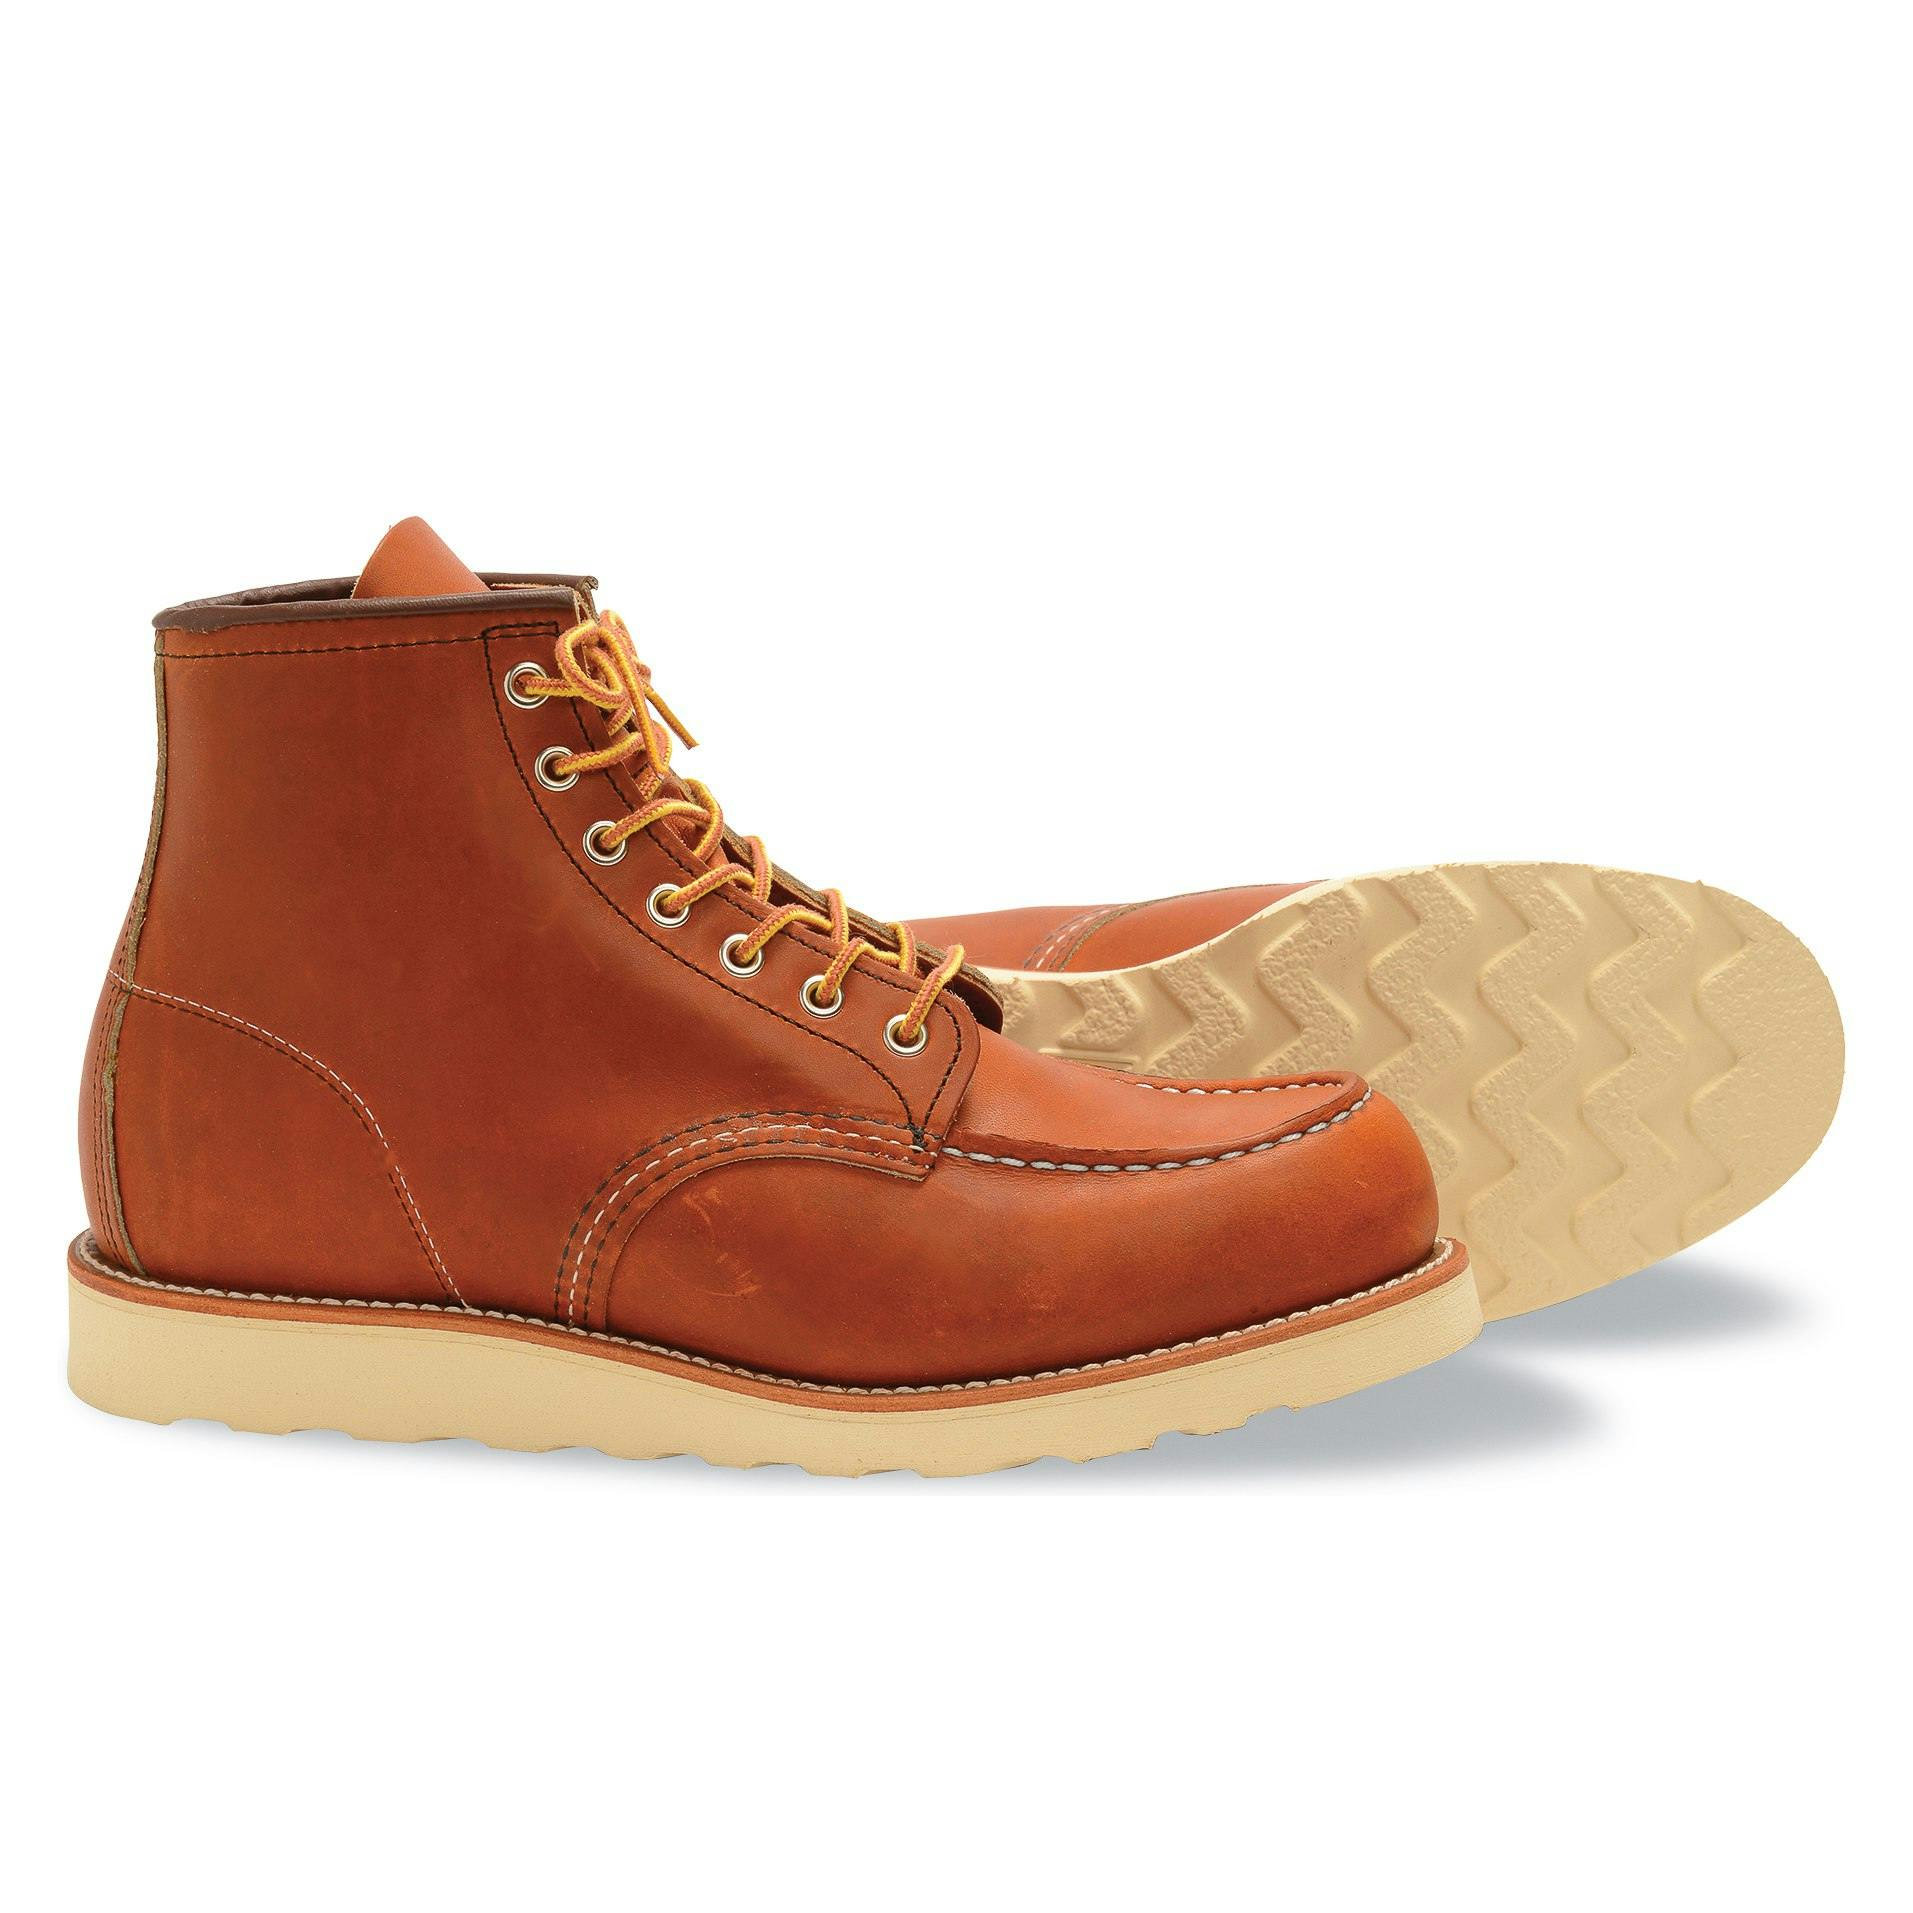 Red Wing Men's 6 Moc Toe Oro Legacy Leather Boot, Tan, 9